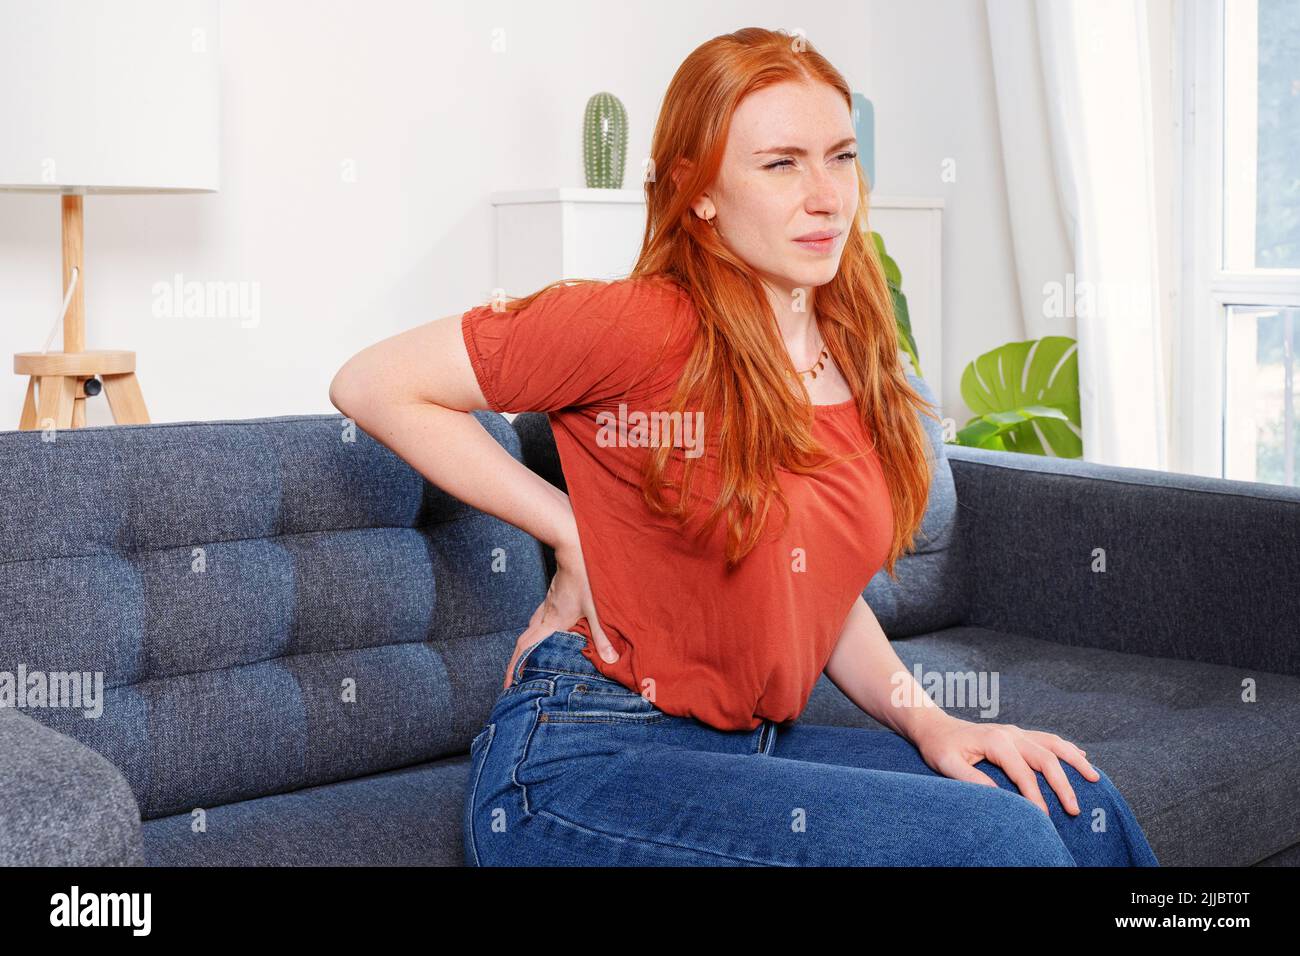 Woman sitting on couch and suffers from low back ache Stock Photo